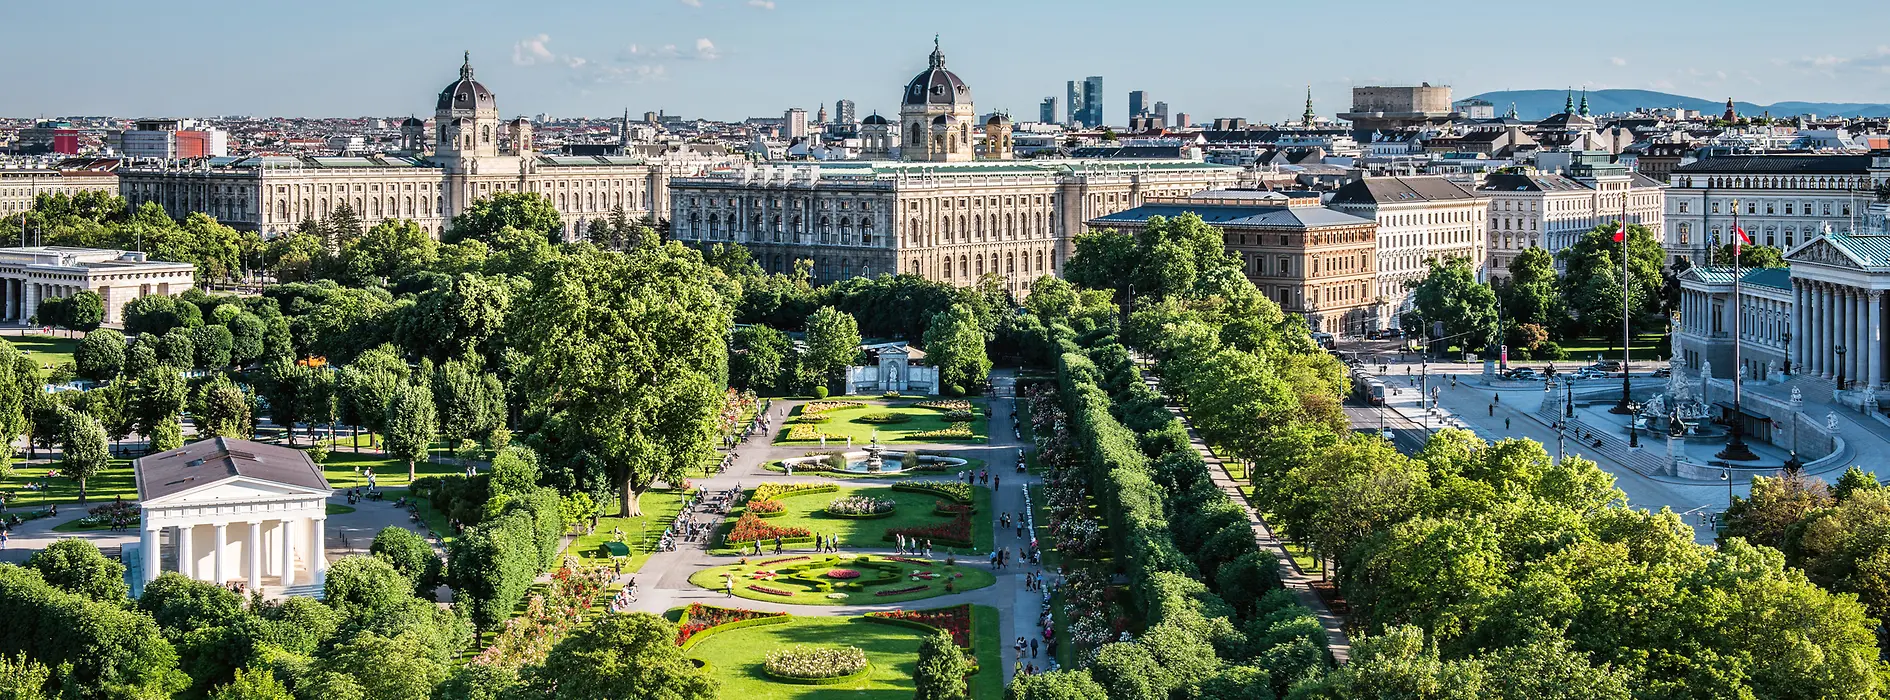 Volksgarten, Museum of Natural History and Kunsthistorisches Museum, and Parliament